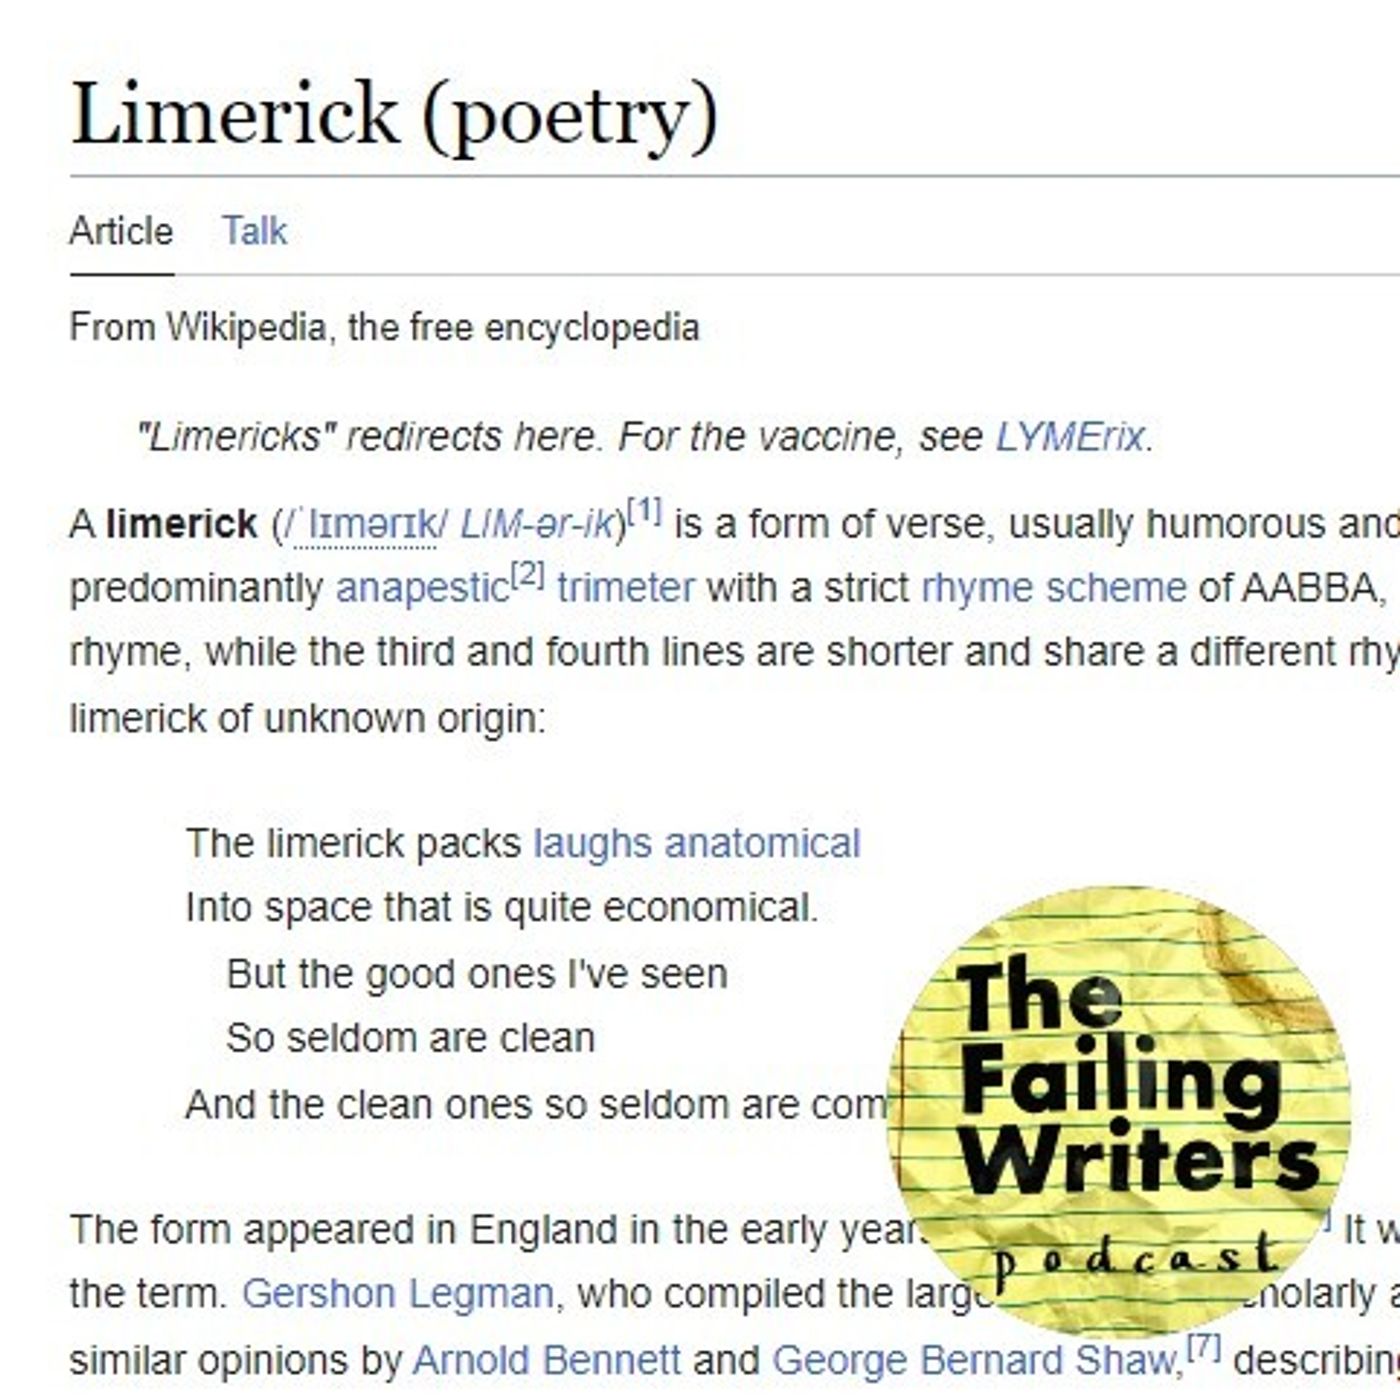 S3 Ep5: There was a podcast about limericks...